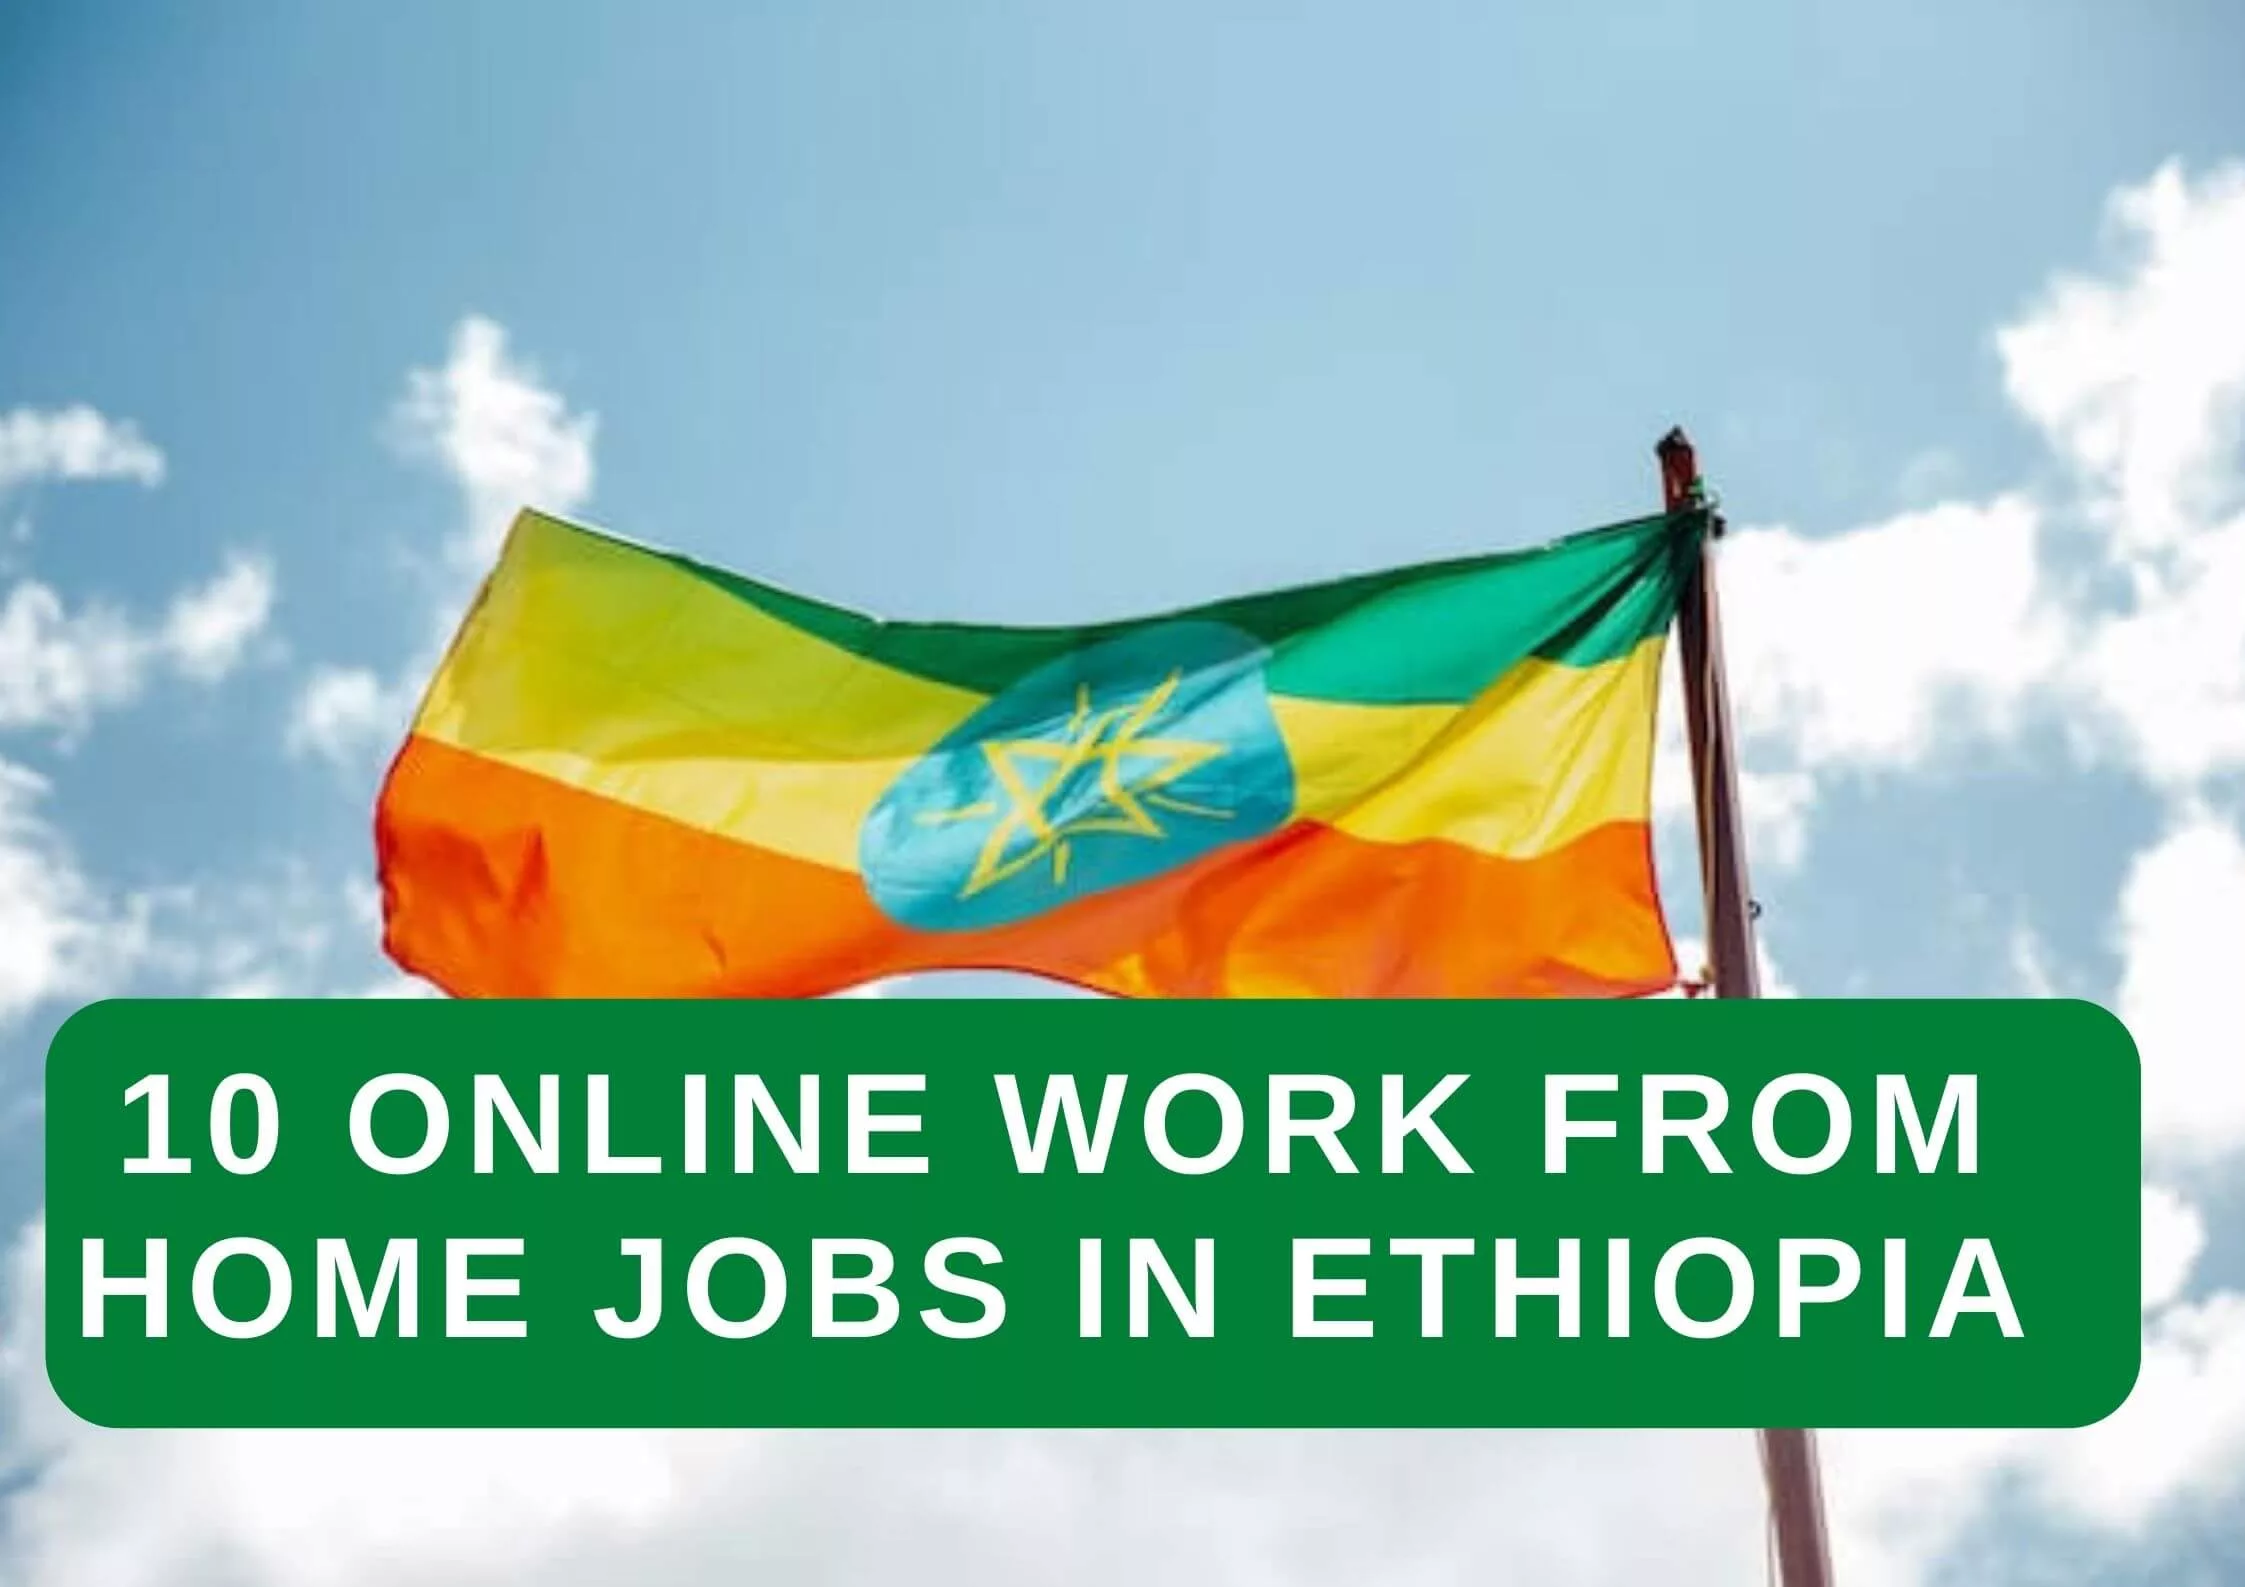 10 Online Work from Home Jobs in Ethiopia